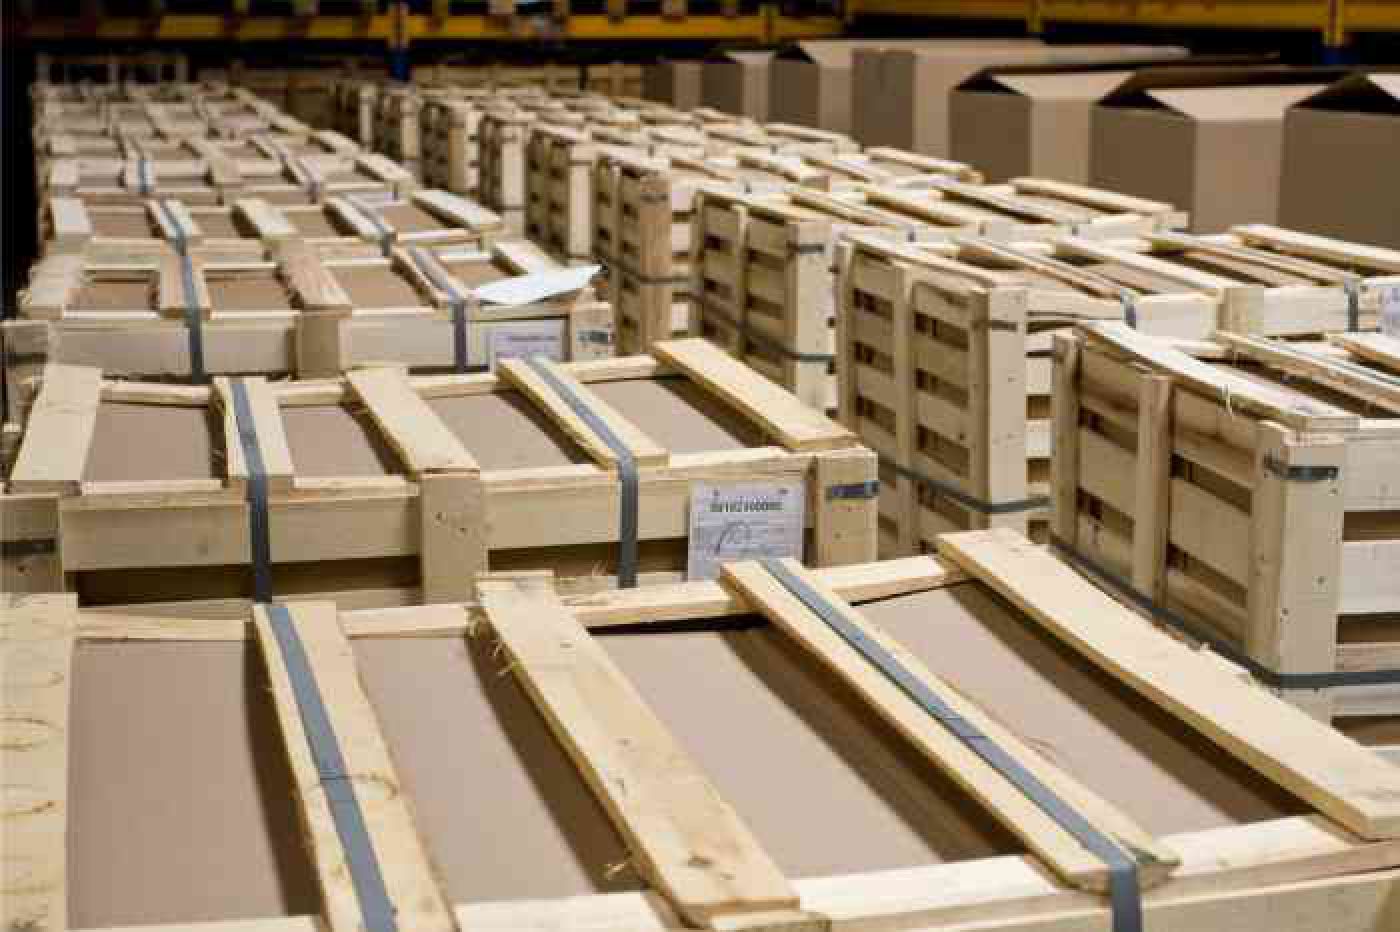 Rows of frame crates